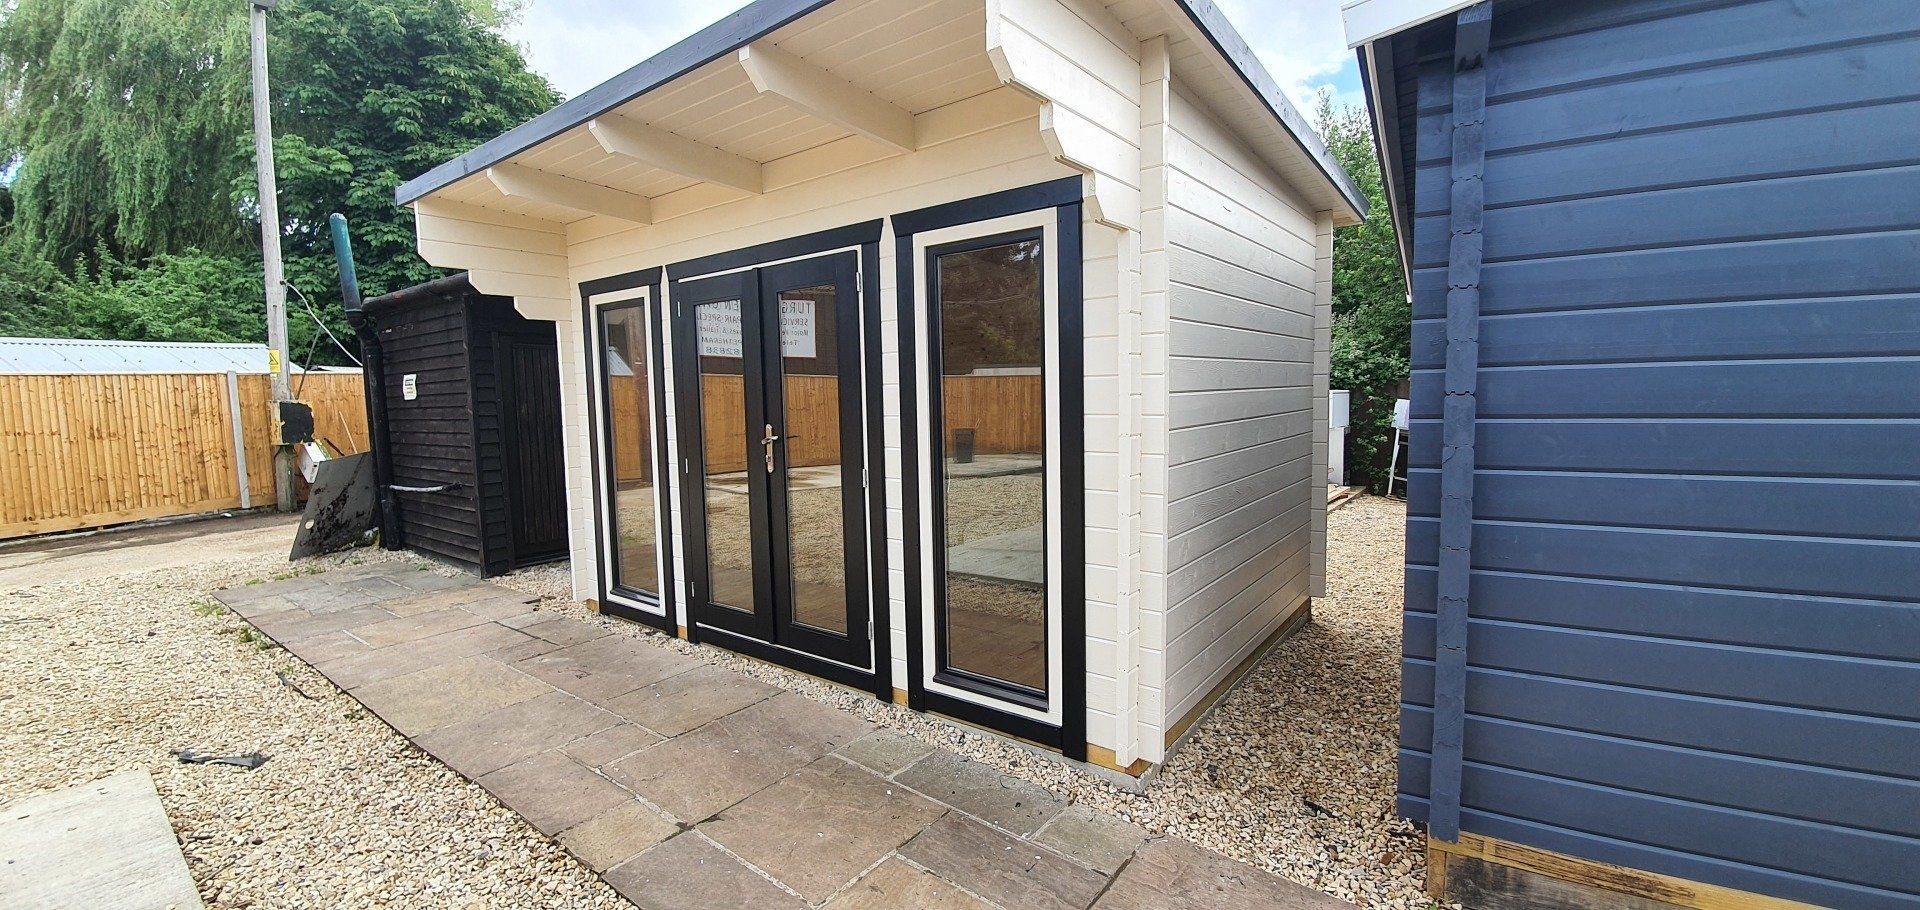 Log Cabins For Sale UK can help create the perfect garden office for you